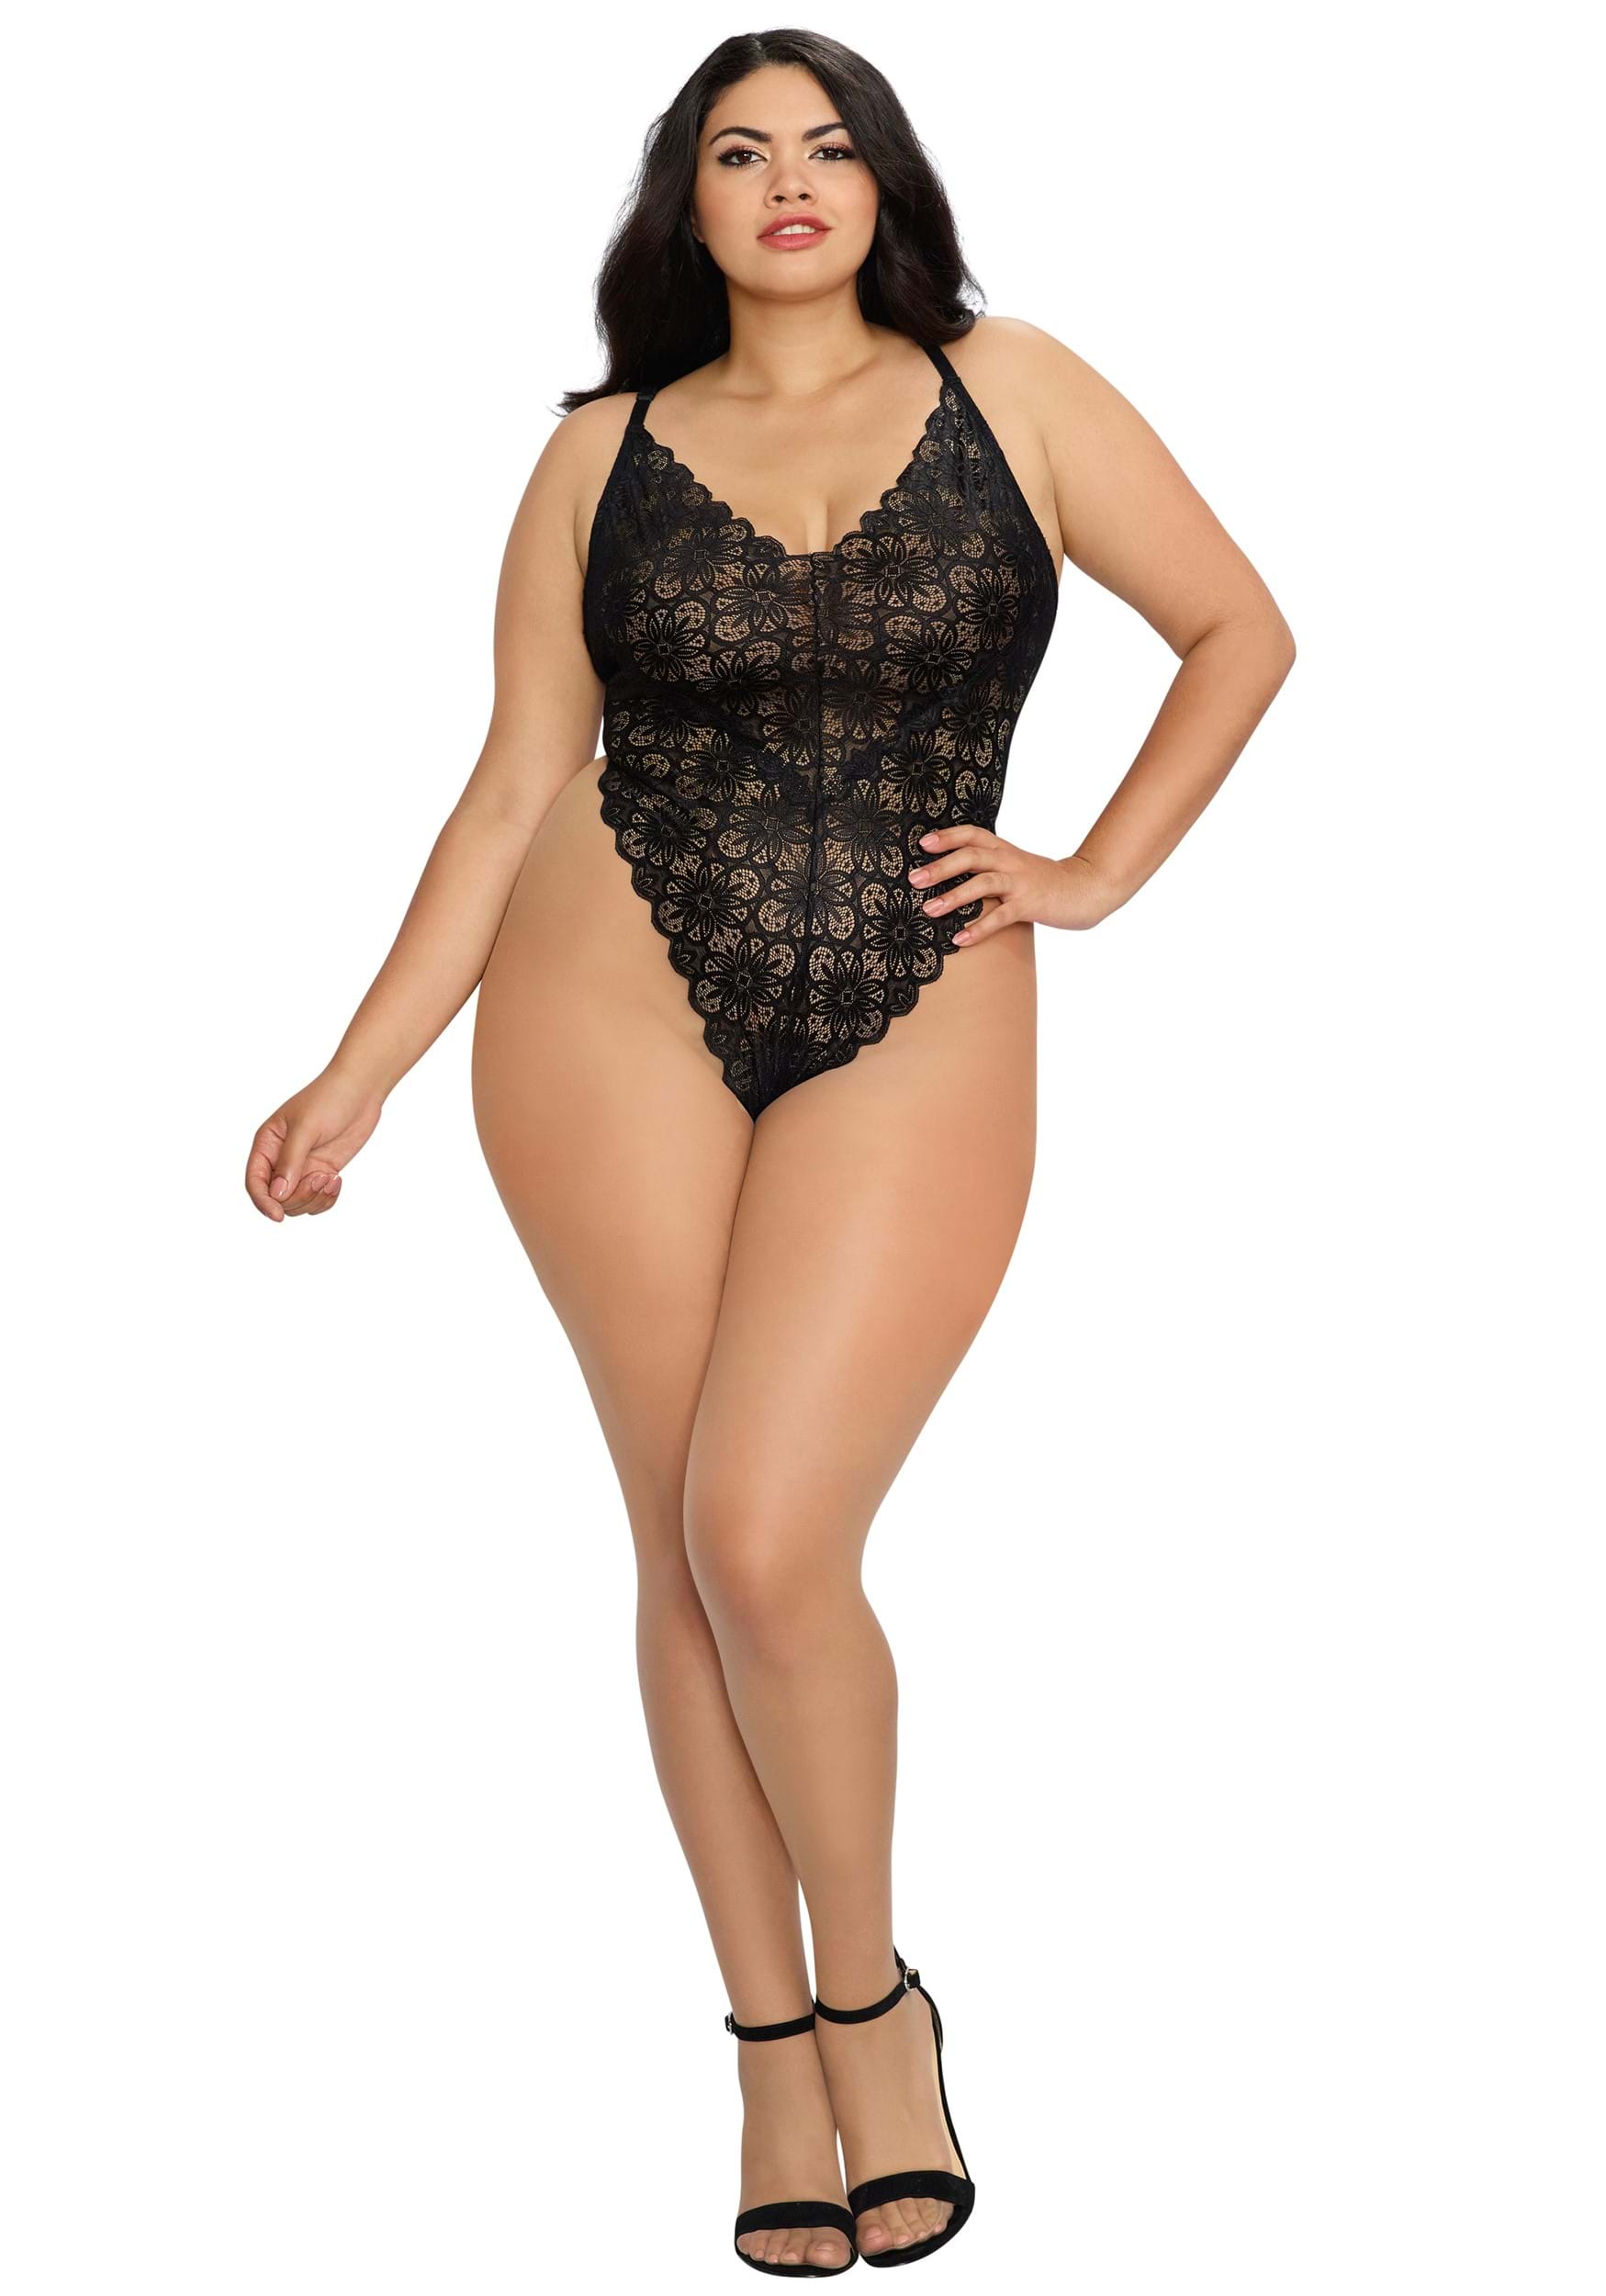 Plus Size Lace Teddy And Sheer Wraparound Skirt , Adult Lingerie